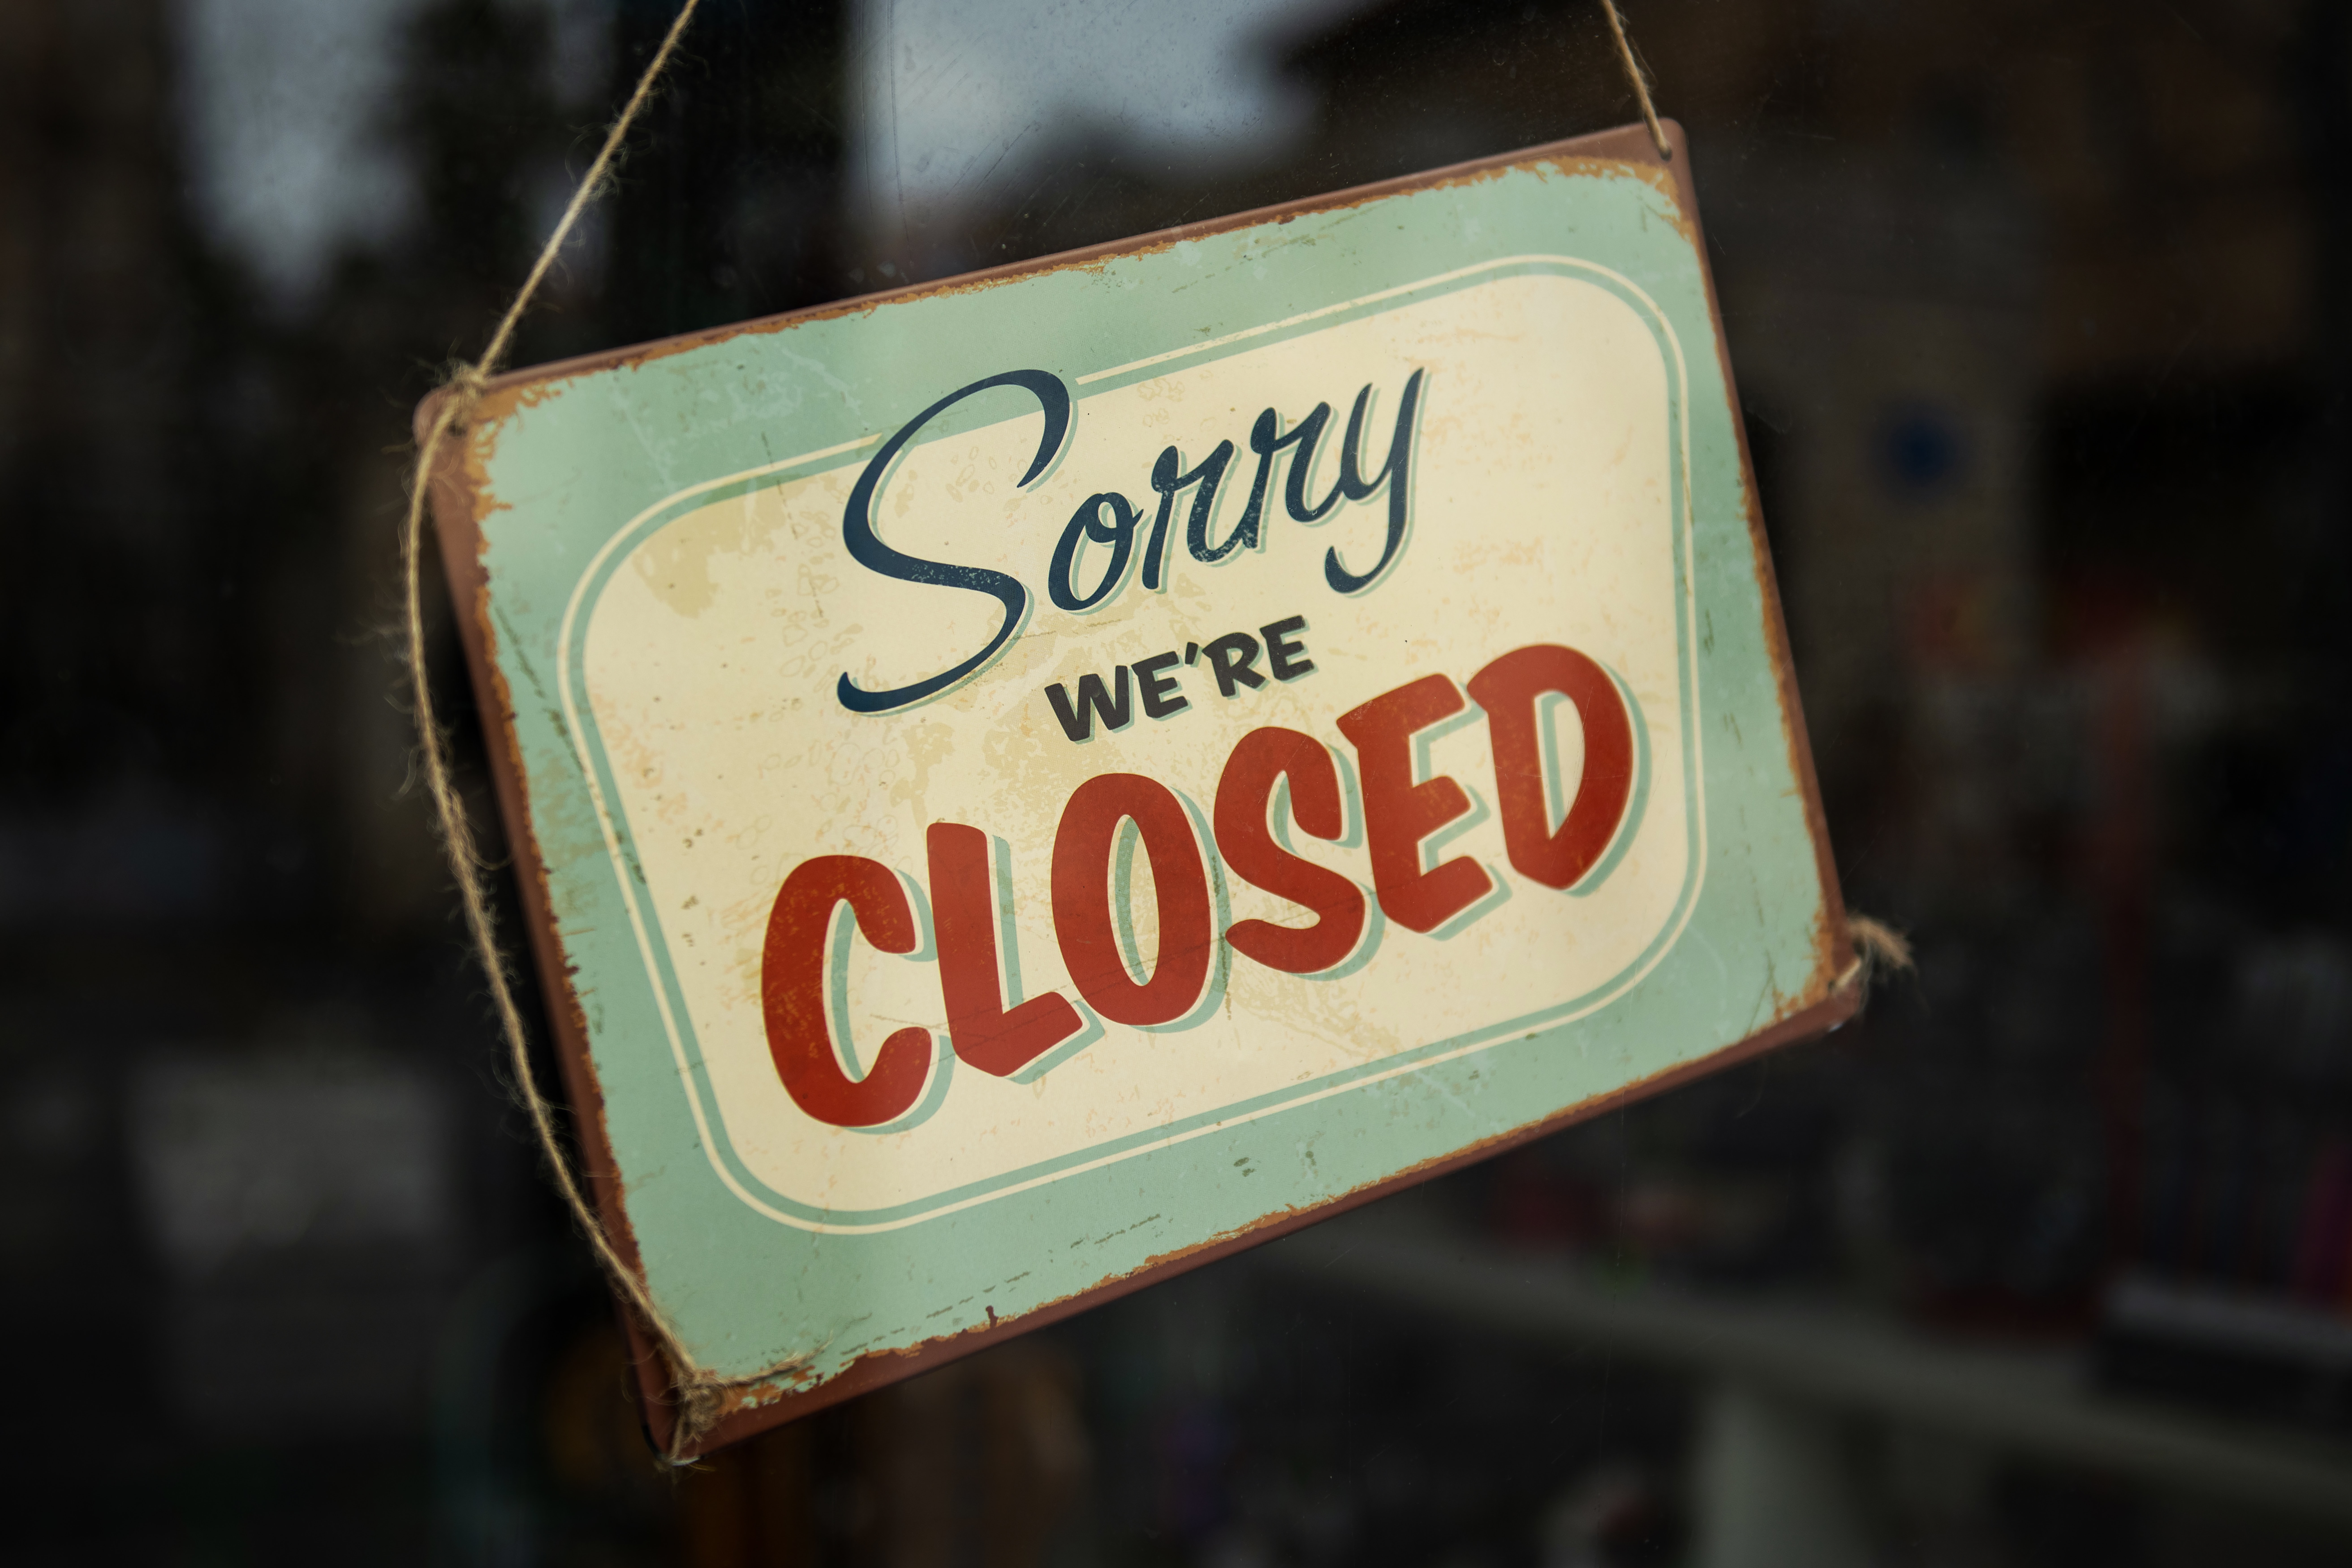 Picture of a sign in a business window that says "Sorry, we're closed."